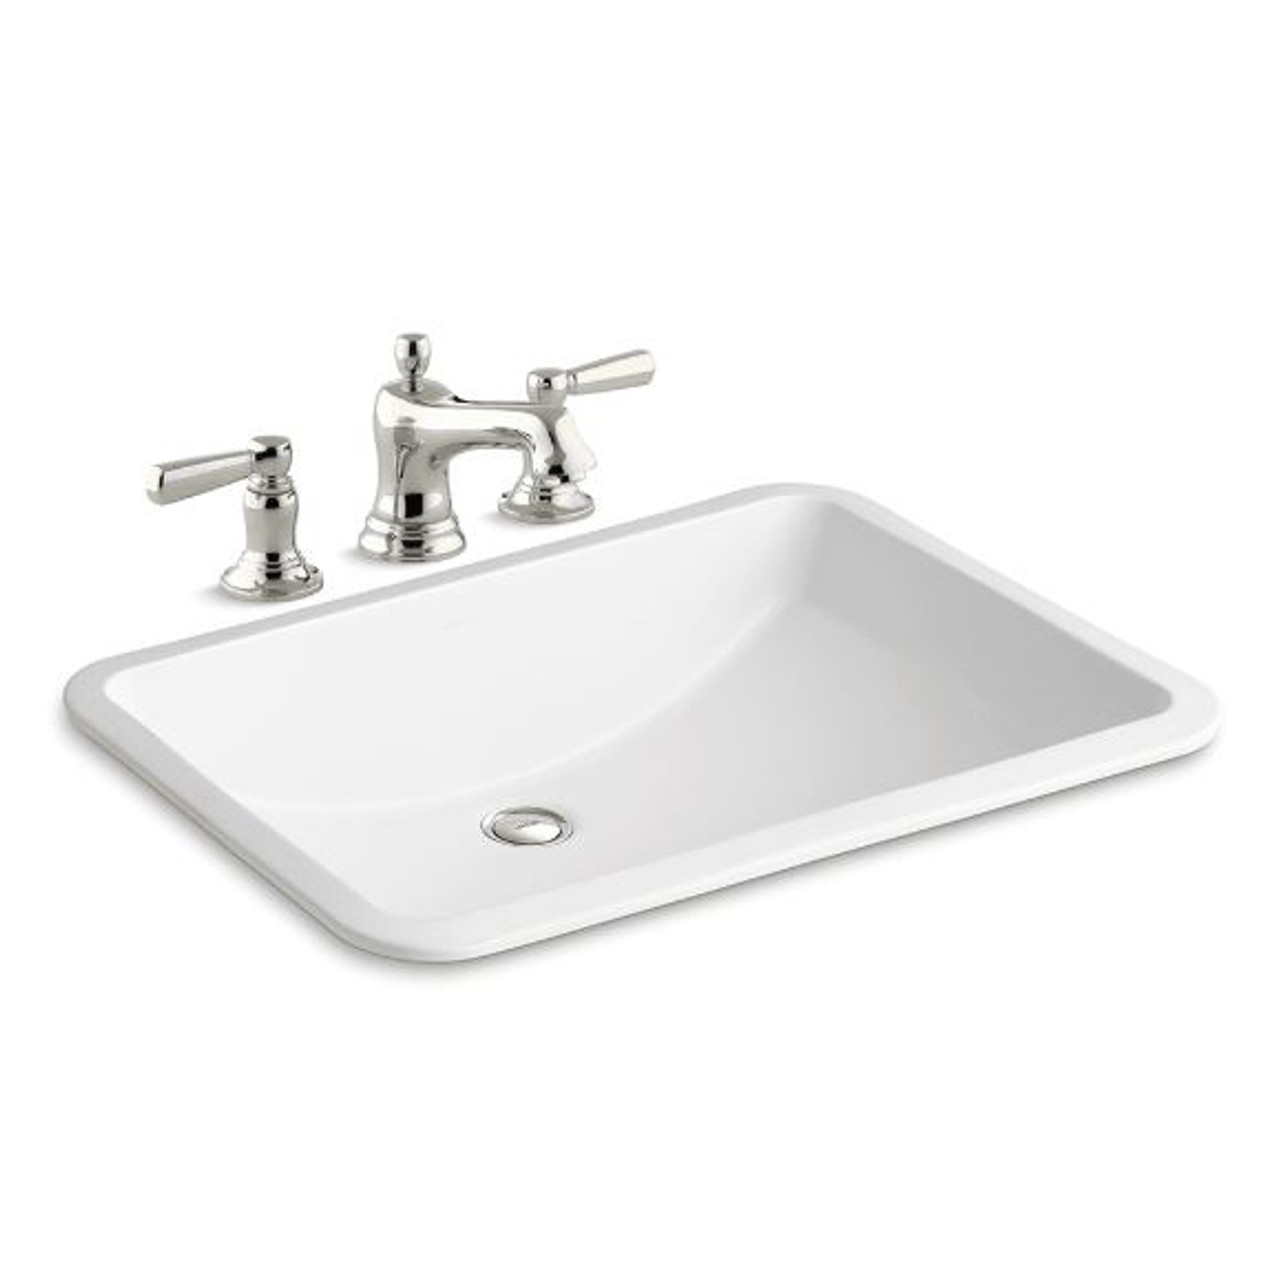 Kohler Ladena 18 3 8 Undermount Bathroom Sink With Overflow And Bancroft Widespread Bathroom Faucet With Pop Up Drain Assembly Royal Bath Place